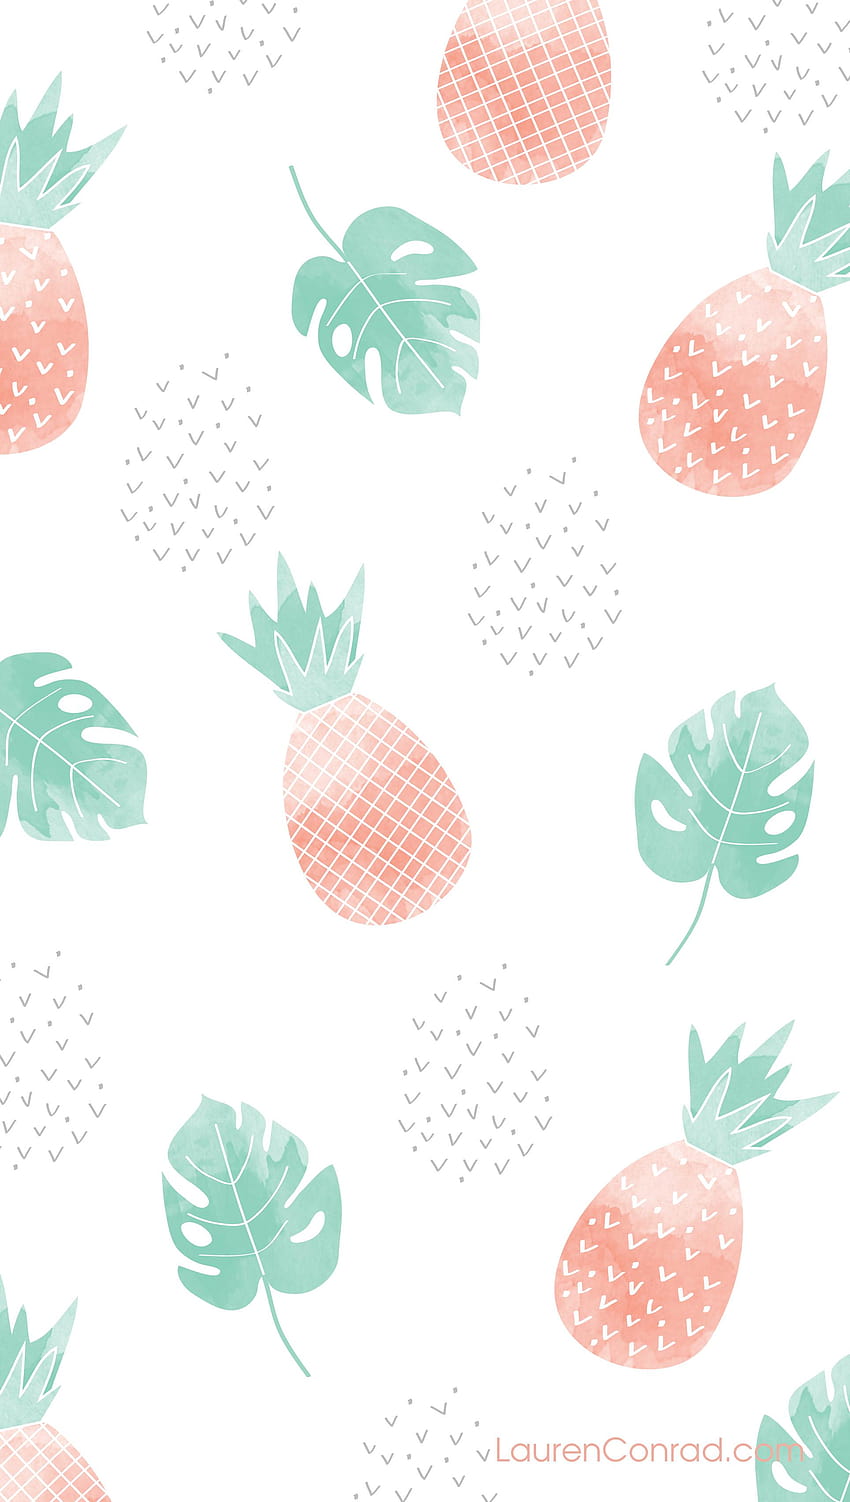 Another Pineapple Iphone, pineapple aesthetic HD phone wallpaper